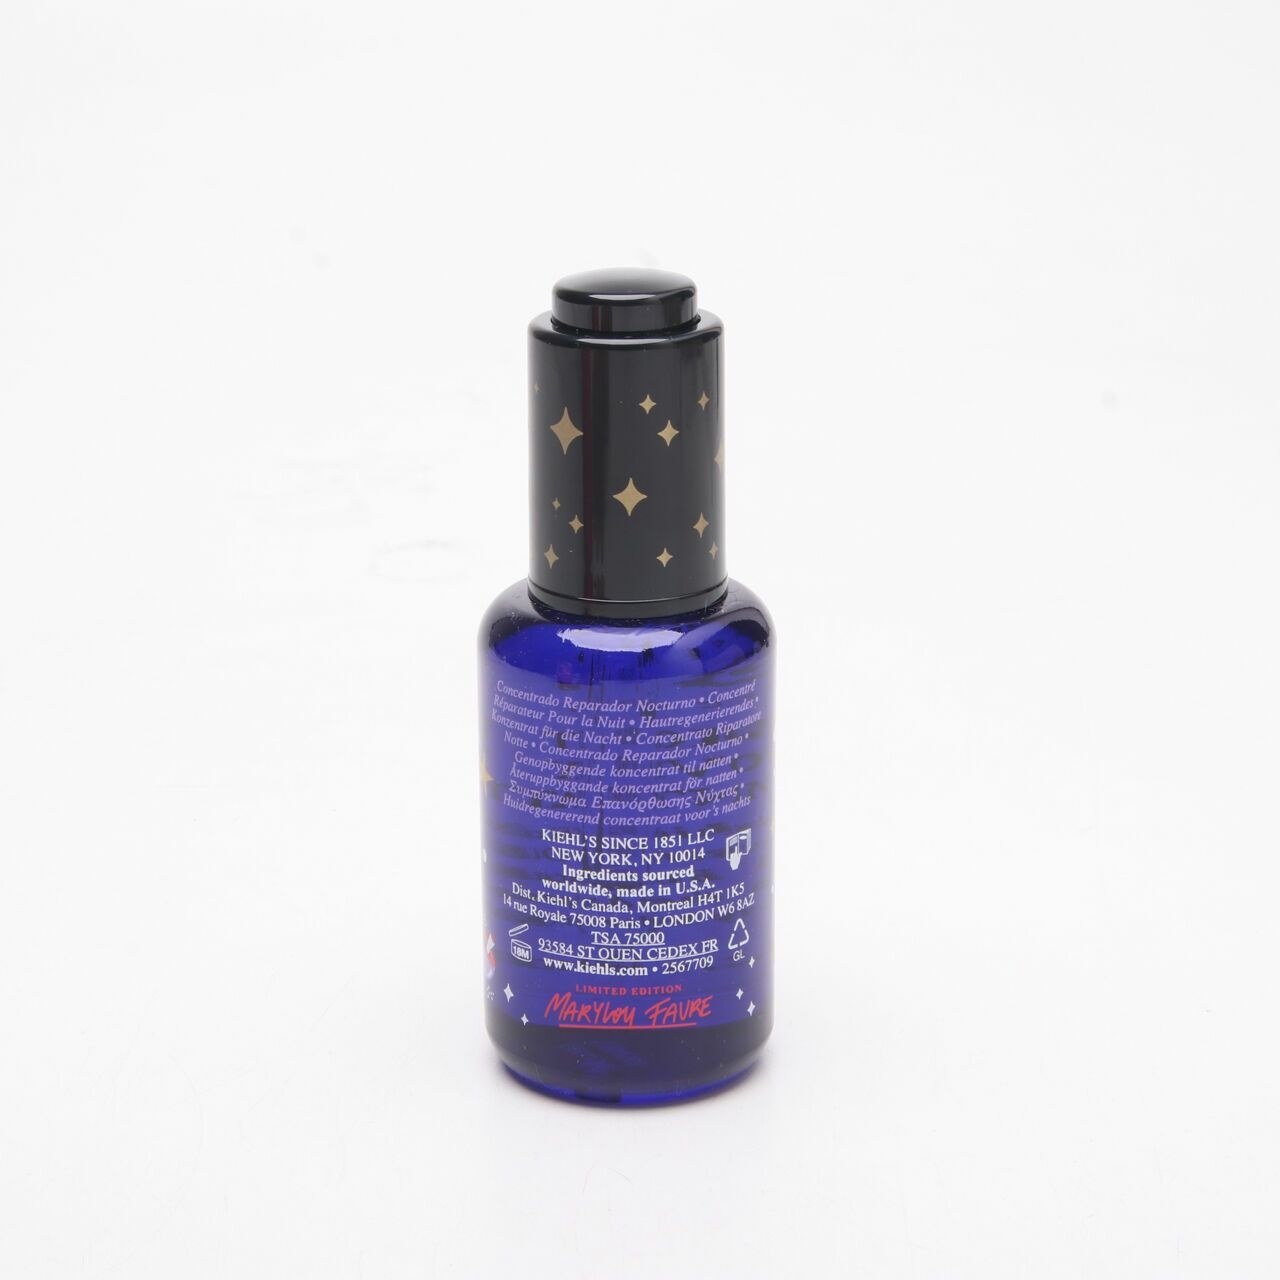 Kiehl's Midnight Recovery Concentrate 50ML Skin Care